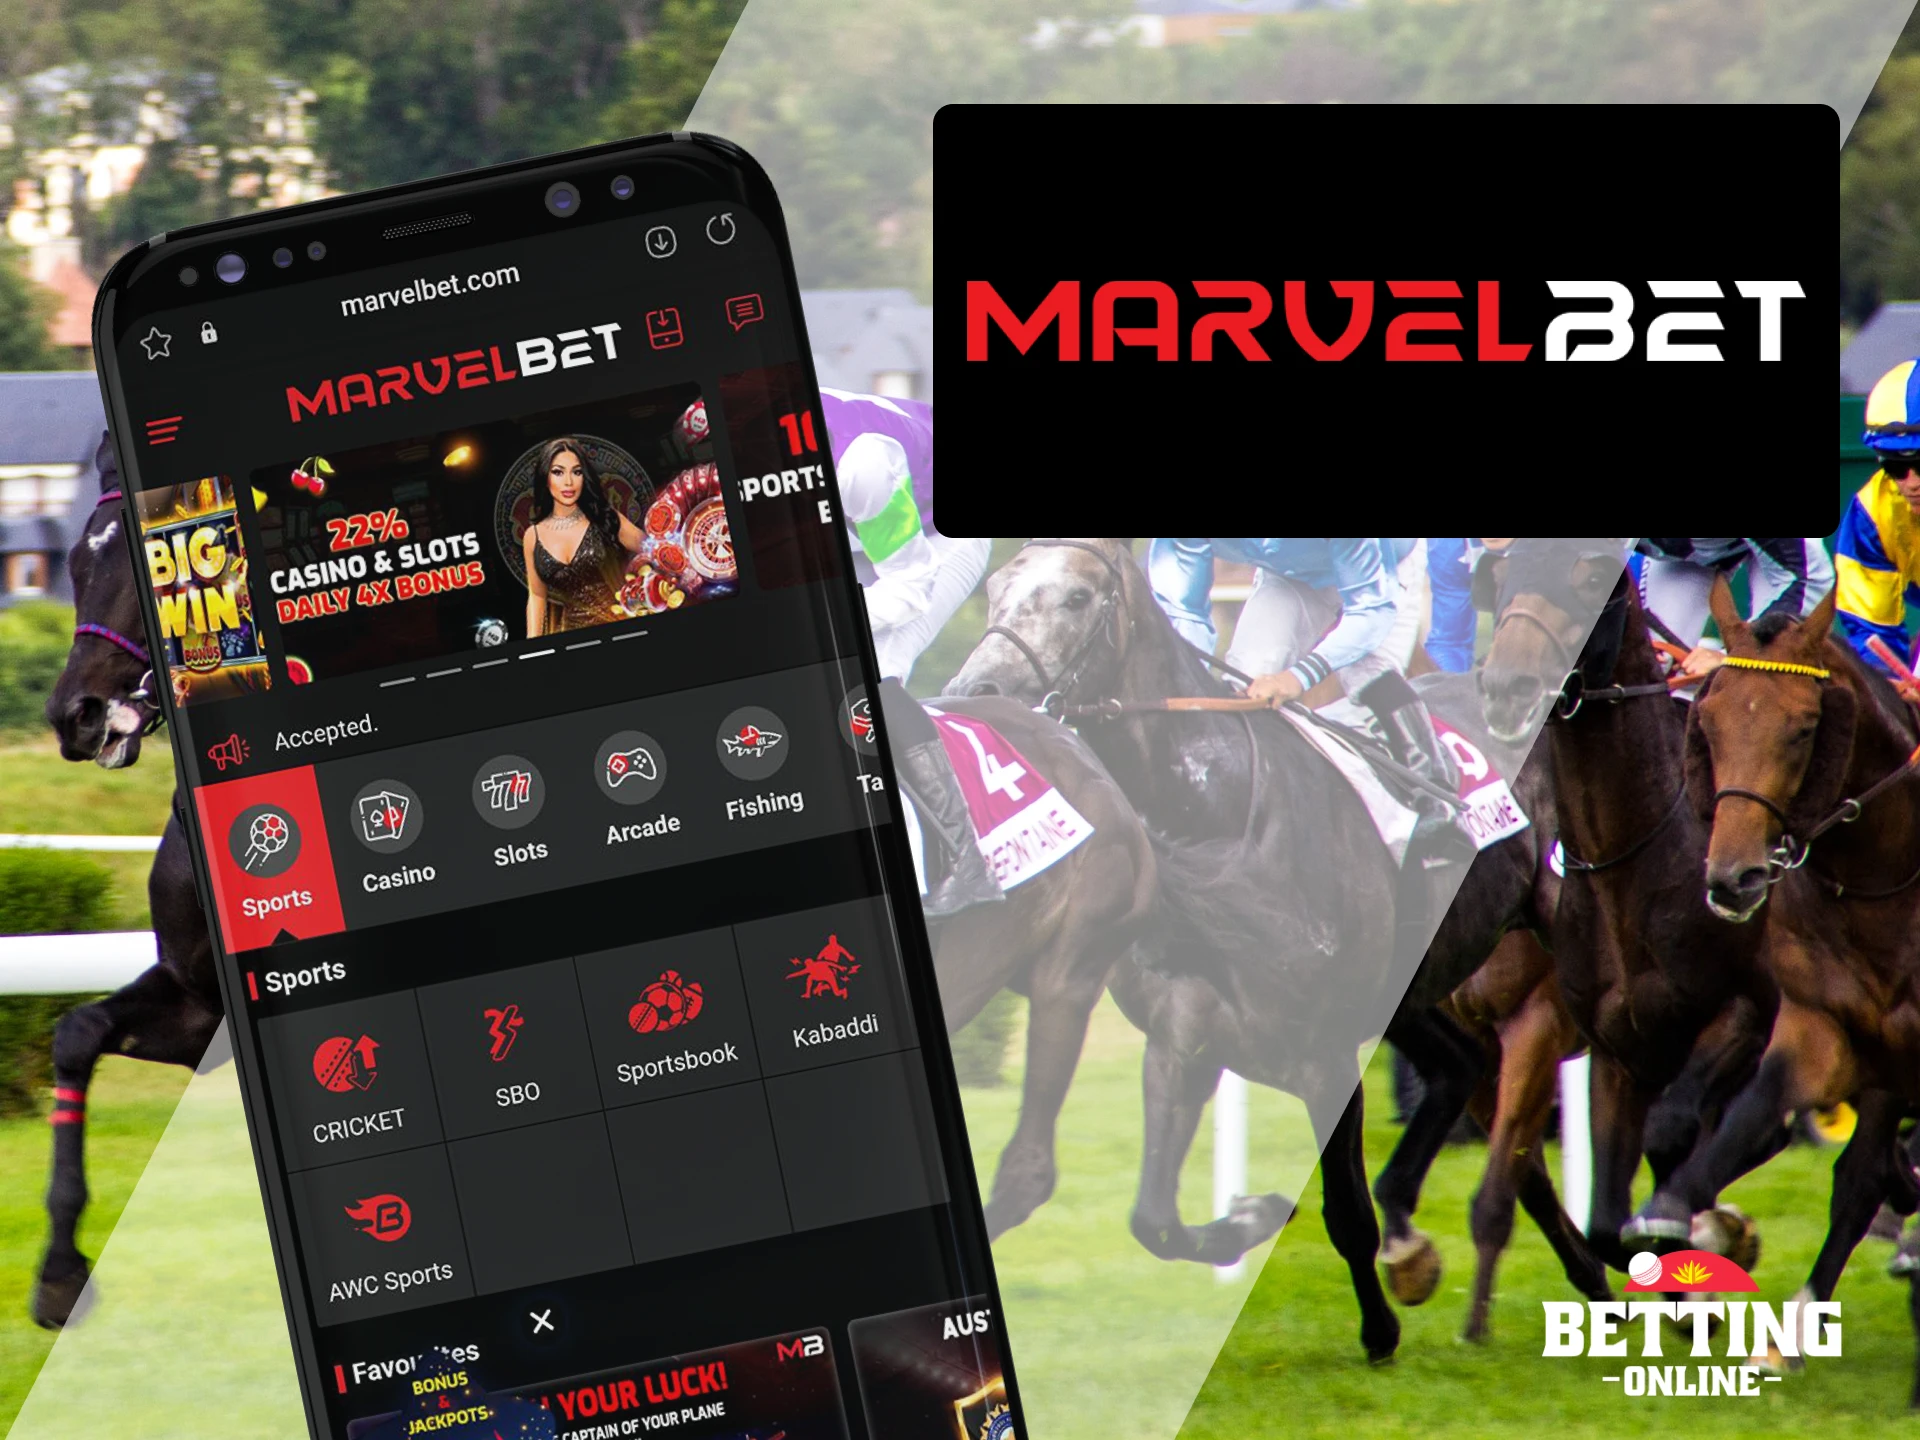 Place your horse racing bets with Marvelbet app.